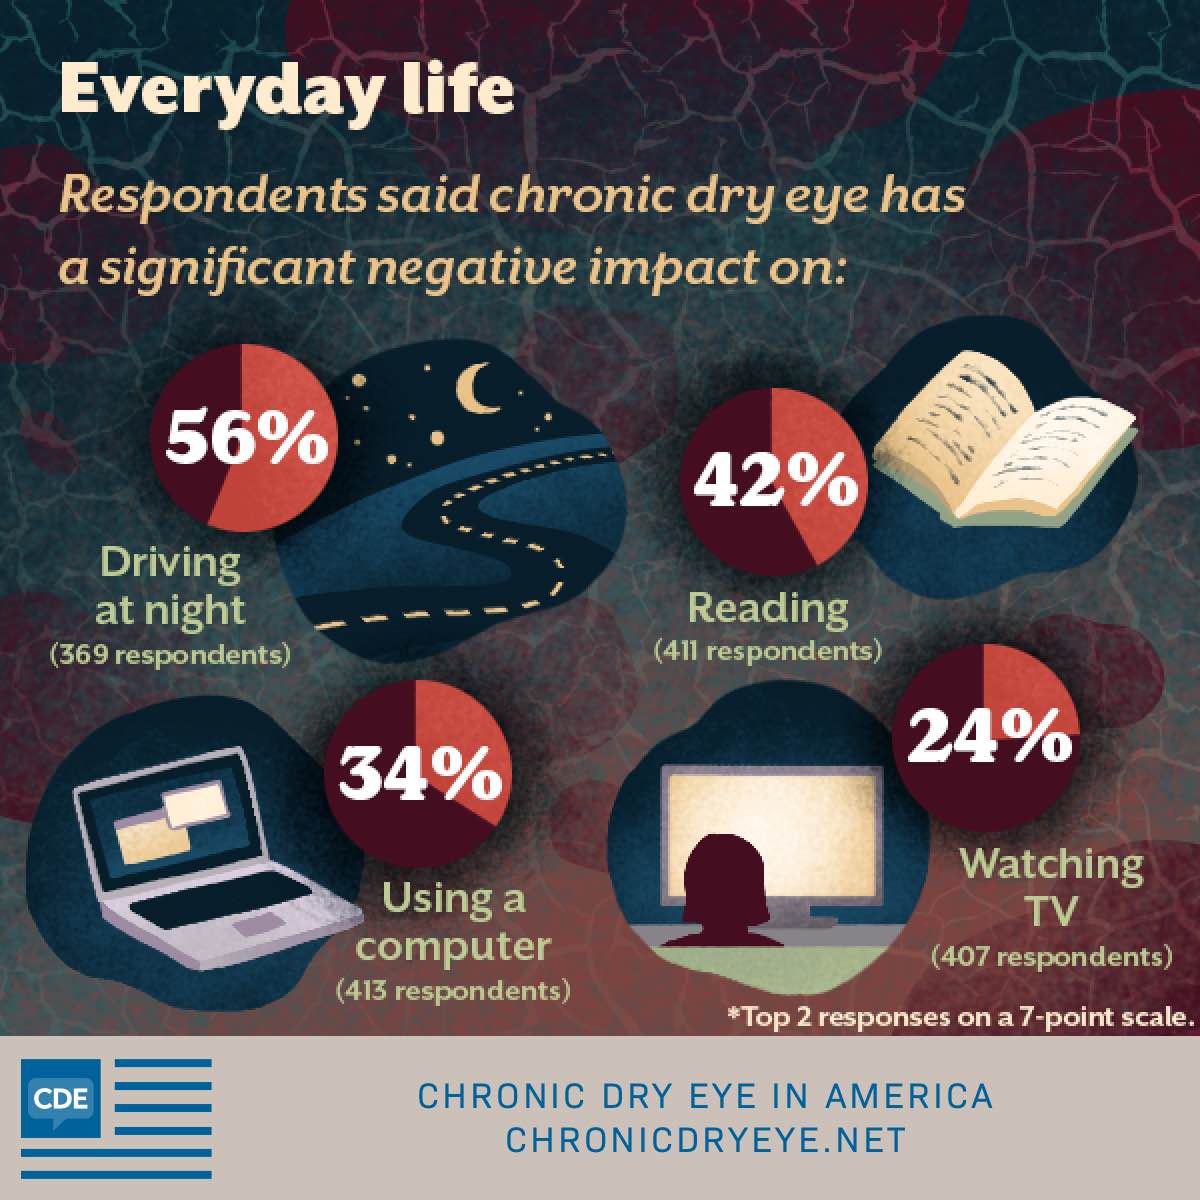 chronic dry eye negatively impacts daily activities like driving and reading